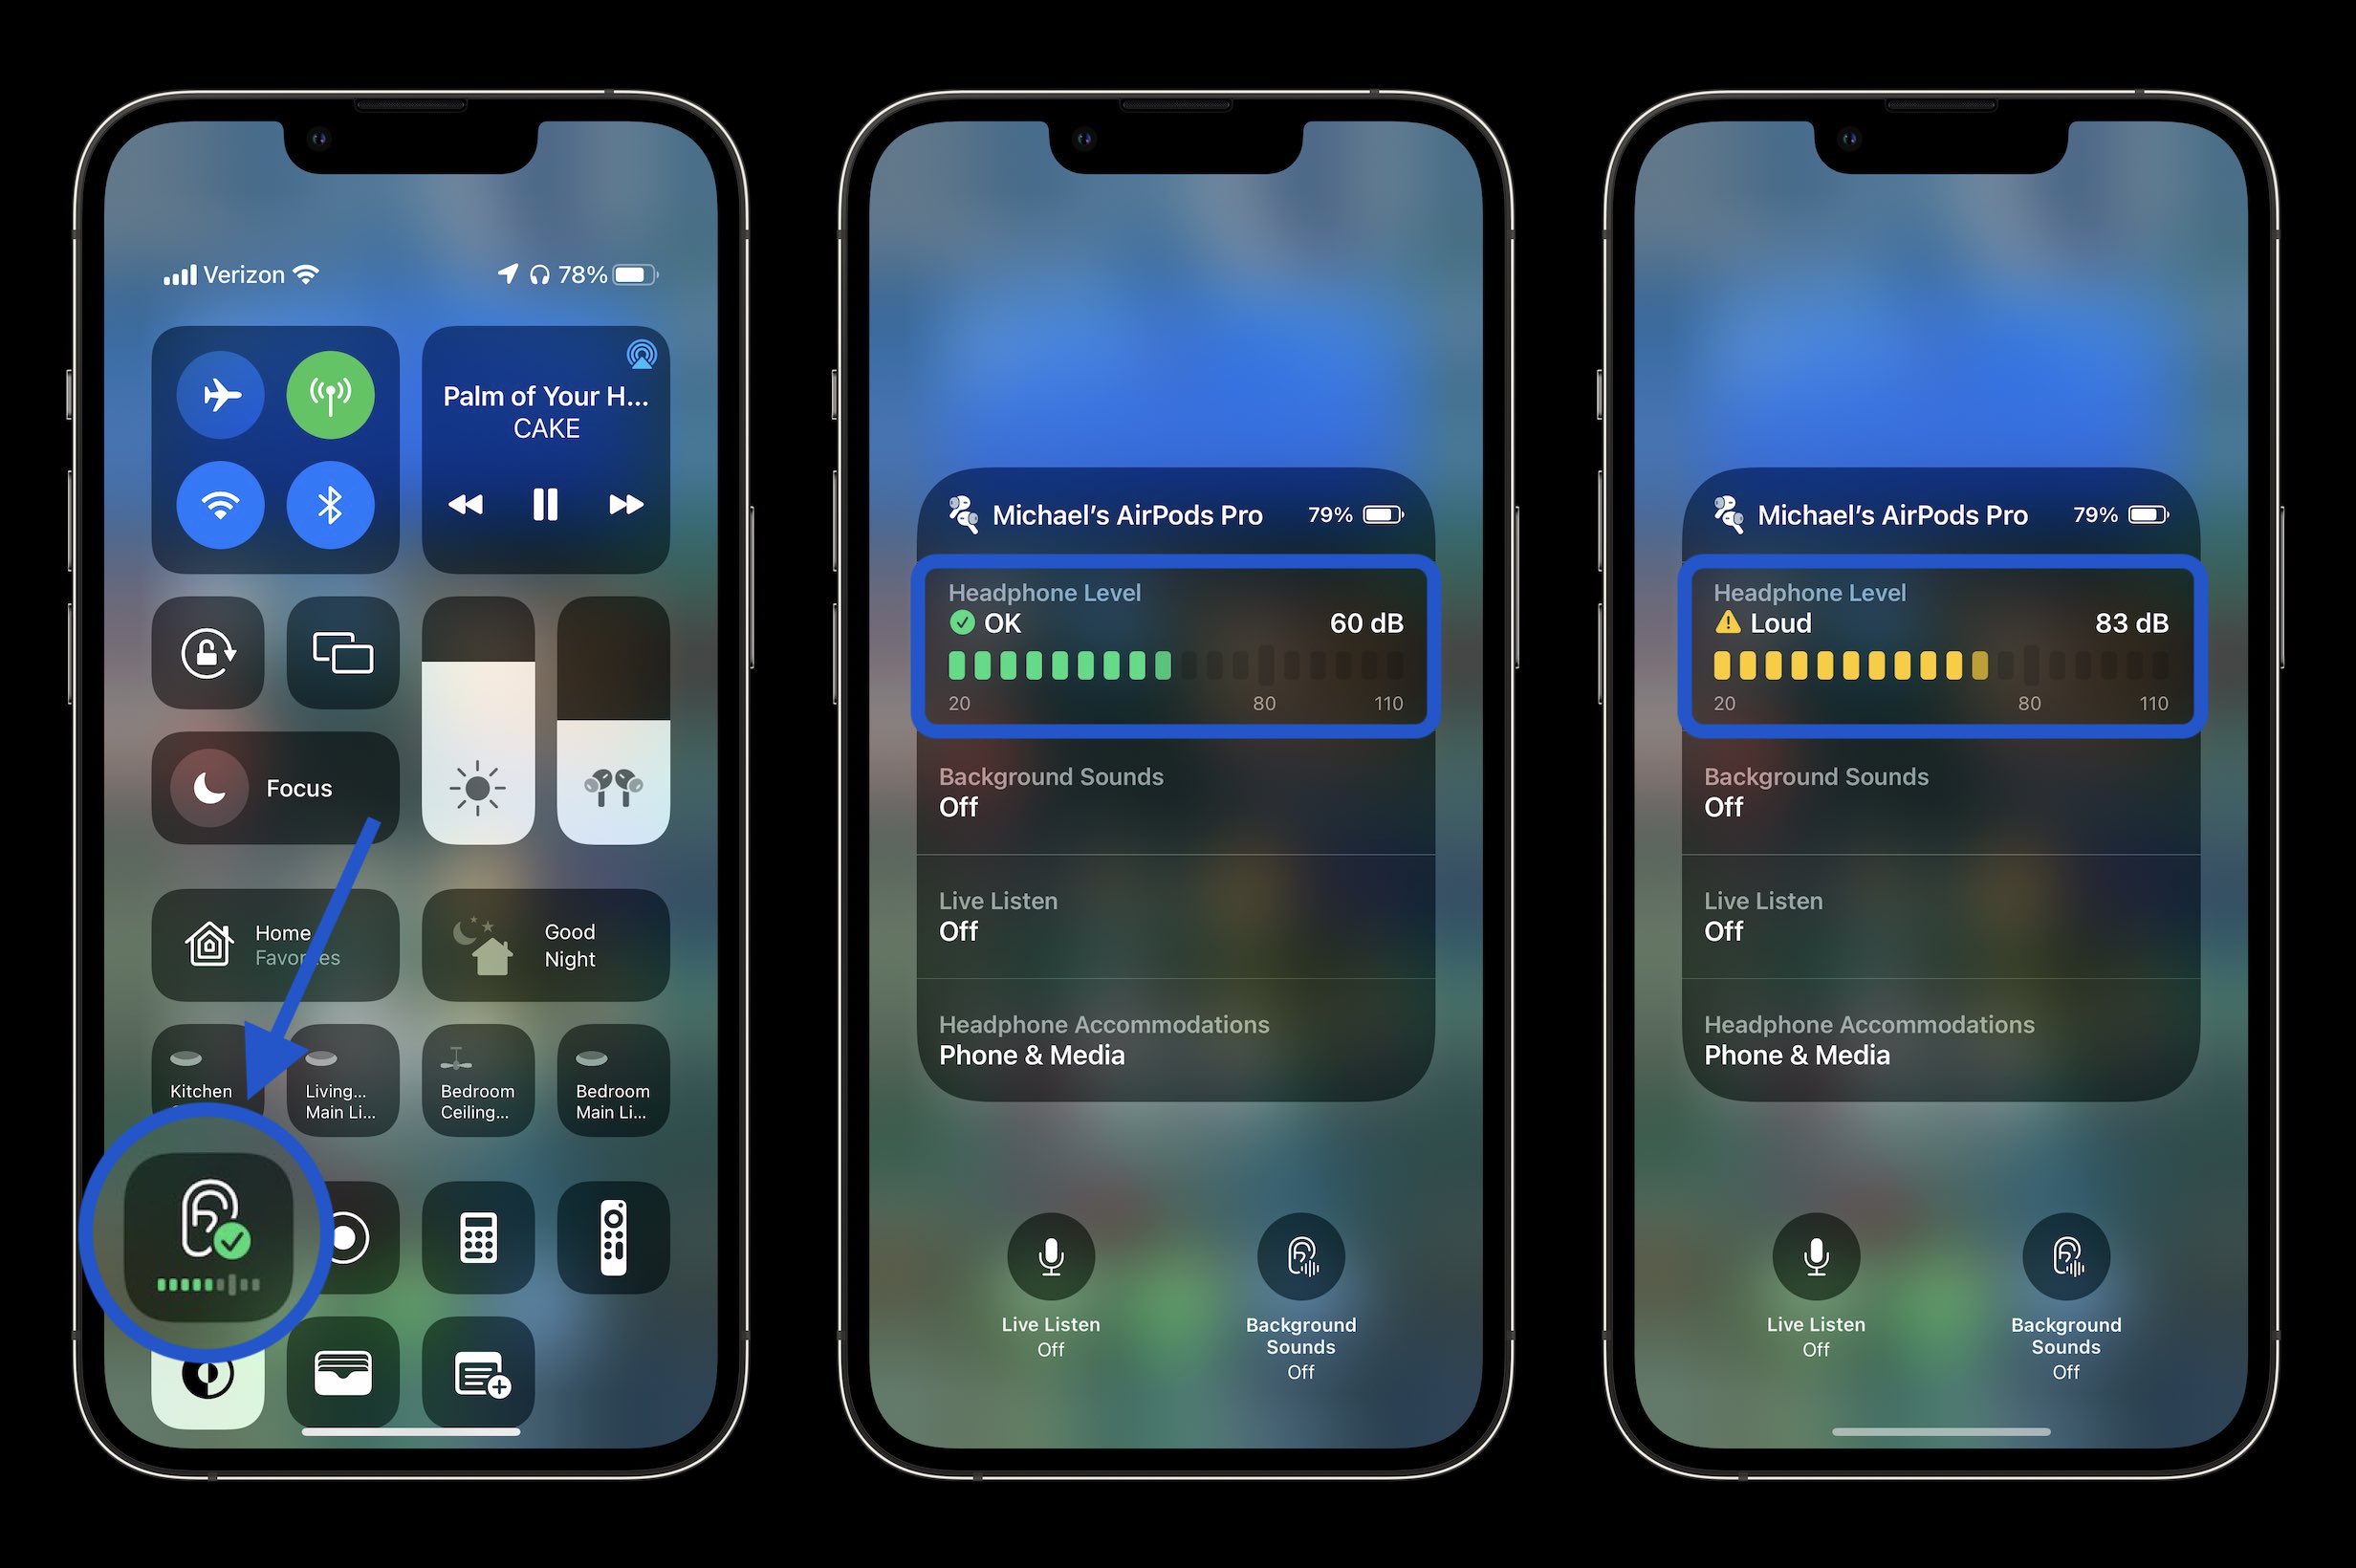 How to Check Decibel Level with iPhone and Apple Watch – Open Control Center on iPhone > Search for Ear Icon Tile” class=”wp-image-788480″ srcset=”https://9to5mac.com/wp-content/uploads/websites/6/2022/02/decibel-levels-with-iphone-and-apple-watch-2.jpg 2464w, https://9to5mac.com/wp -content/uploads/websites/6/2022/02/decibel-levels-with-iphone-and-apple-watch-2.jpg?resize=155103 155w, https://9to5mac.com/wp-content/uploads/ websites/6/2022/02/decibel-levels-with-iphone-and-apple-watch-2.jpg?resize=655436 655w, https://9to5mac.com/wp-content/uploads/websites/6/2022 /02/decibel-levels-with-iphone-and-apple-watch-2.jpg?resize=768,511 768w, https://9to5mac.com/wp-content/uploads/websites/6/2022/02/decibel- levels-with-iphone-and-apple-watch-2.jpg?resize=1024,682 1024w, https://9to5mac.com/wp-content/uploads/websites/6/2022/02/decibel-levels-with -iphone-and-apple-watch-2.jpg?resize=1536,1022 1536w, https://9to5mac.com/wp-content/uploads/websites/6/2022/02/decibel-levels-with-iphone- and-apple-watch-2.jpg?resize=2048,1363 2048w, https://9to5mac.com/wp-content/uploads/websites/6/2022/02/decibel-levels-with-iphone-and-apple -watch-2.jpg?resize=350,233 350w, https:  //9to5mac.com/wp-content/uploads/websites/6/2022/02/decibel-levels-with-iphone-and-apple-watch-2.jpg?resize=1502,1000 1502w, https://9to5mac .com/wp-content/uploads/websites/6/2022/02/decibel-levels-with-iphone-and-apple-watch-2.jpg?resize=150,100 150w” sizes=”(max-width: 2464px) 100vw, 2464px”,</figure>
<ul>
<li>When music is paused, you may measure it utilizing your headphones’ microphone <strong><em>ambient decibel stage</em>s</strong></li>
<li>Faucet the microphone icon that claims <strong><em>hear dwell</em></strong>    within the decrease left nook (or faucet the Hear Stay rectangle)</li>
</ul>
<figure class=